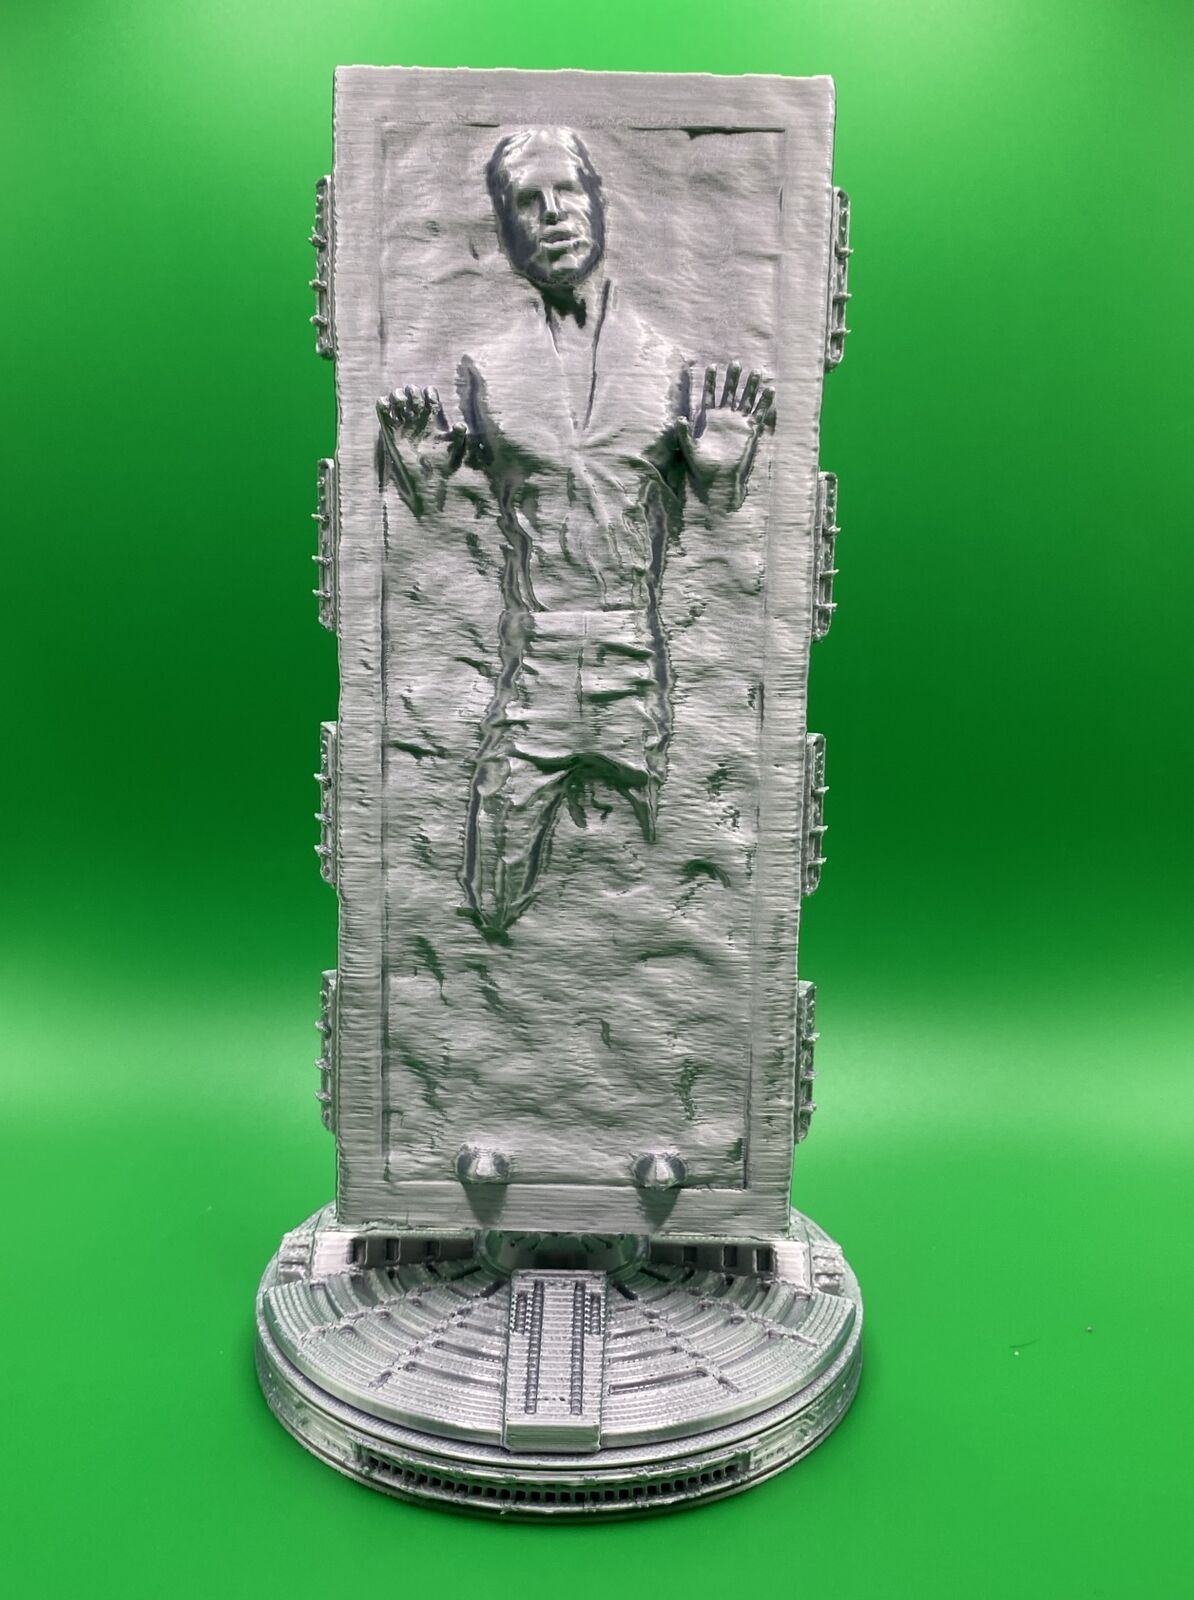 Han Solo in Carbonite 3D Printed Star Wars | Plastic Filament | 7.5 Inches Tall